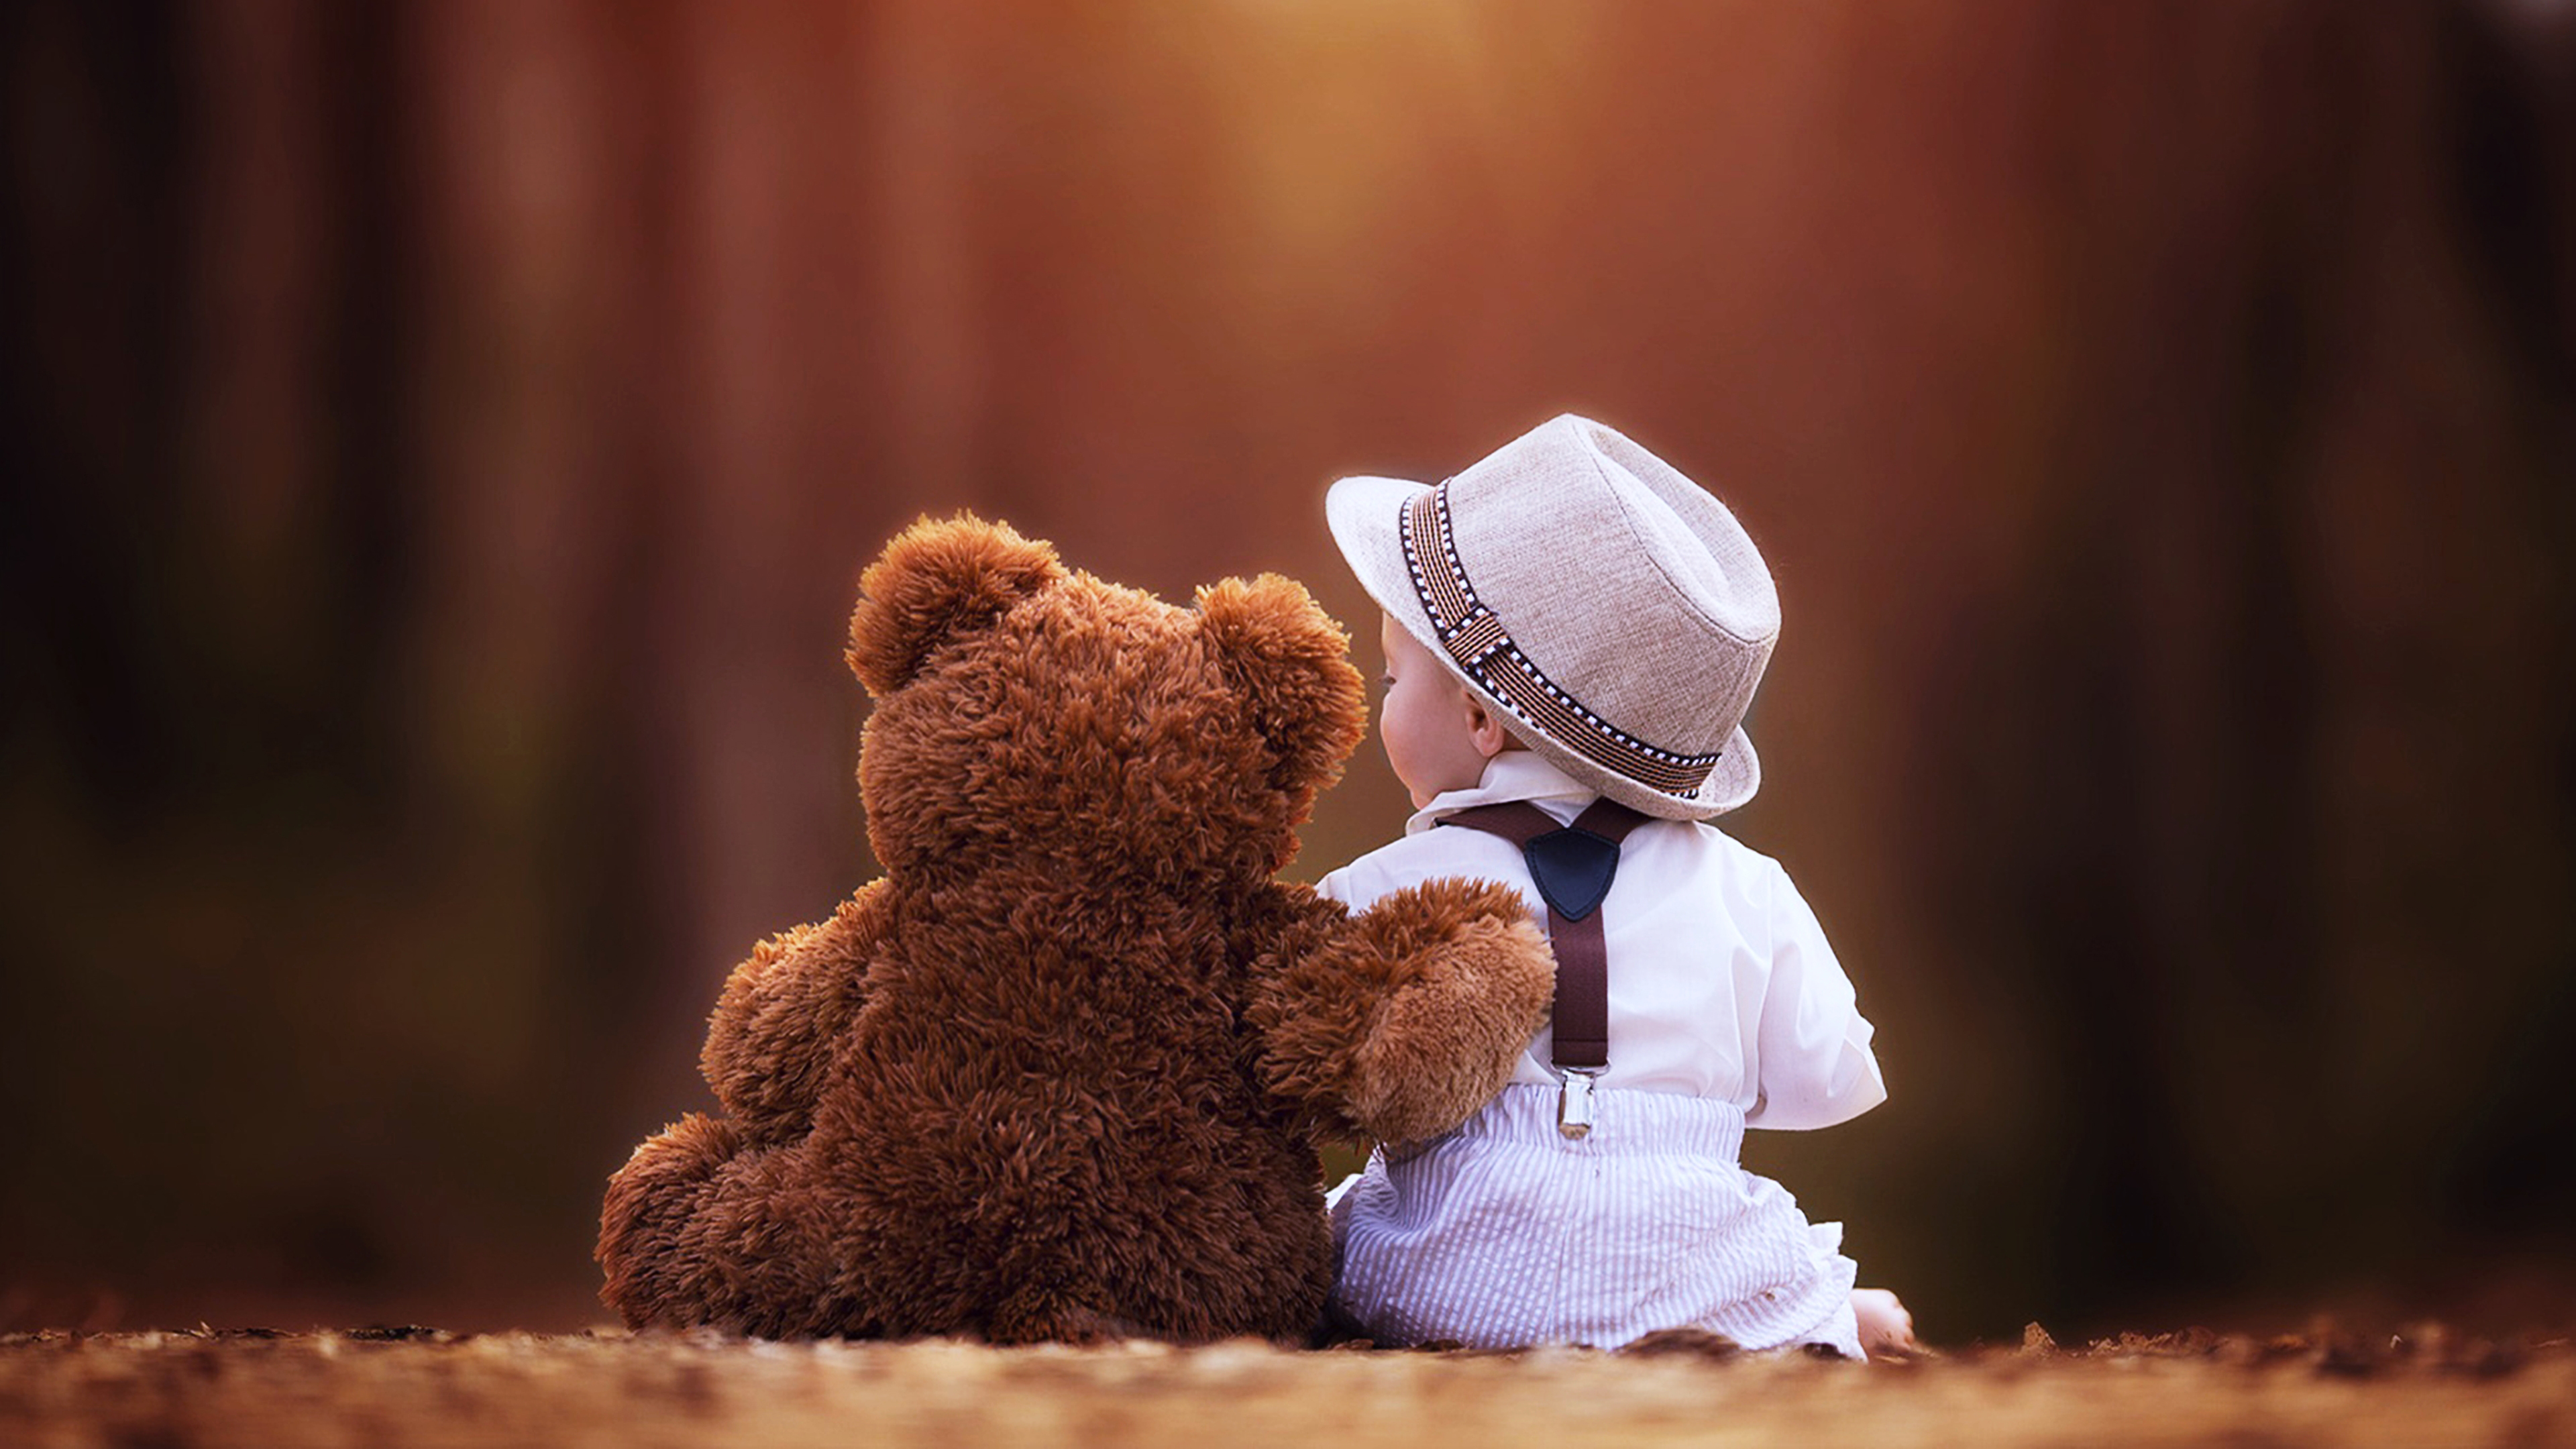 Backside Of Cute Baby Is Wearing White Dress And Hat Sitting With Teddy Bear K 2K Cute